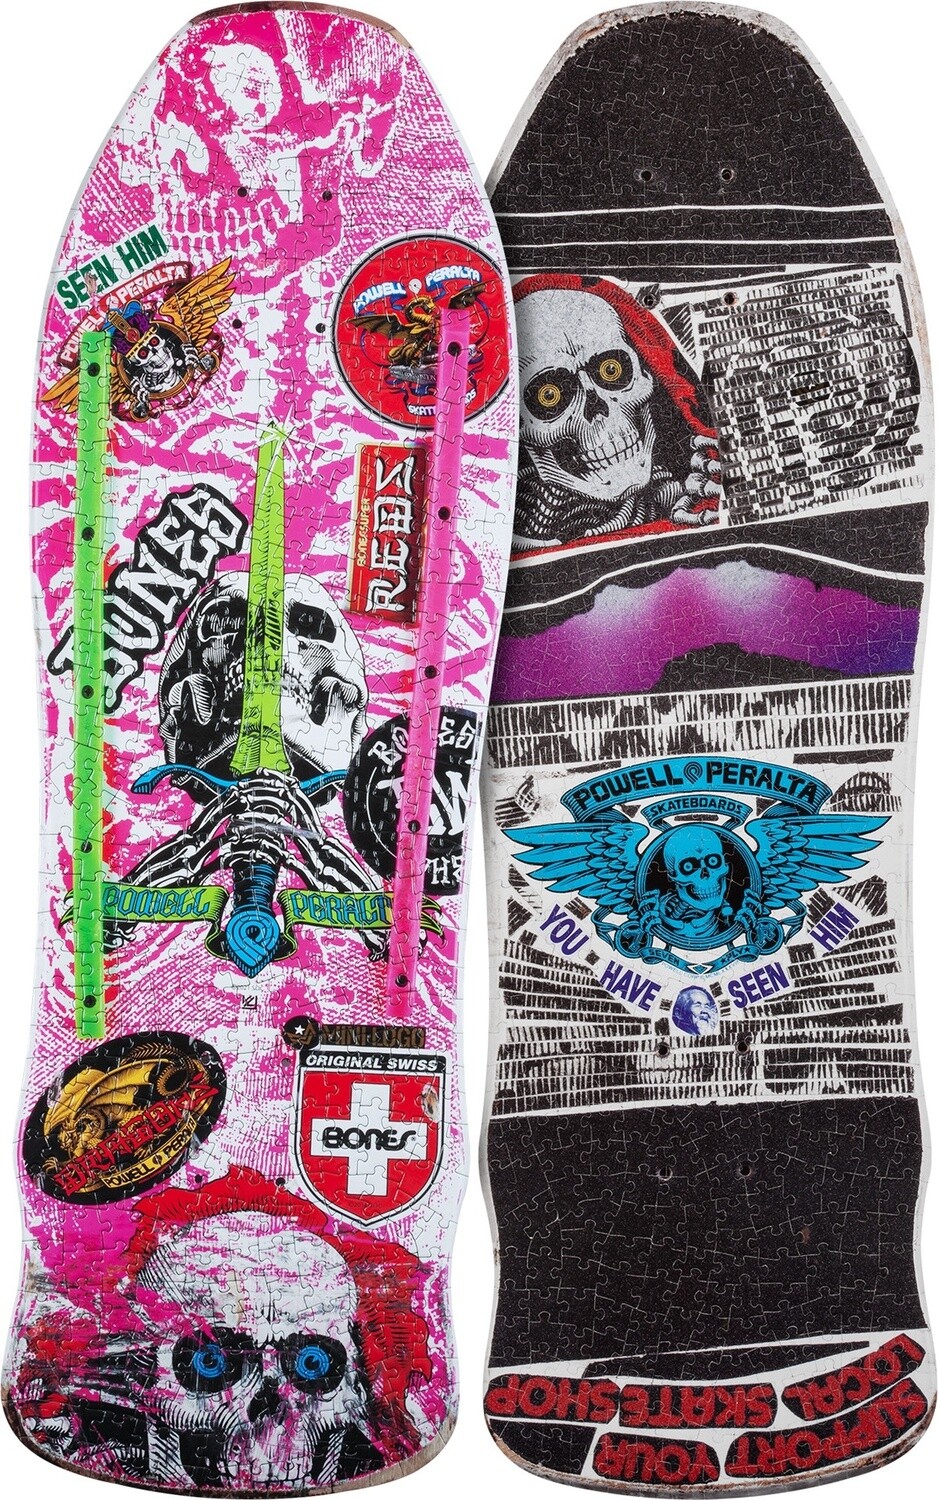 Powell Peralta Skull and Sword Geegah Pink 500 Piece Puzzle